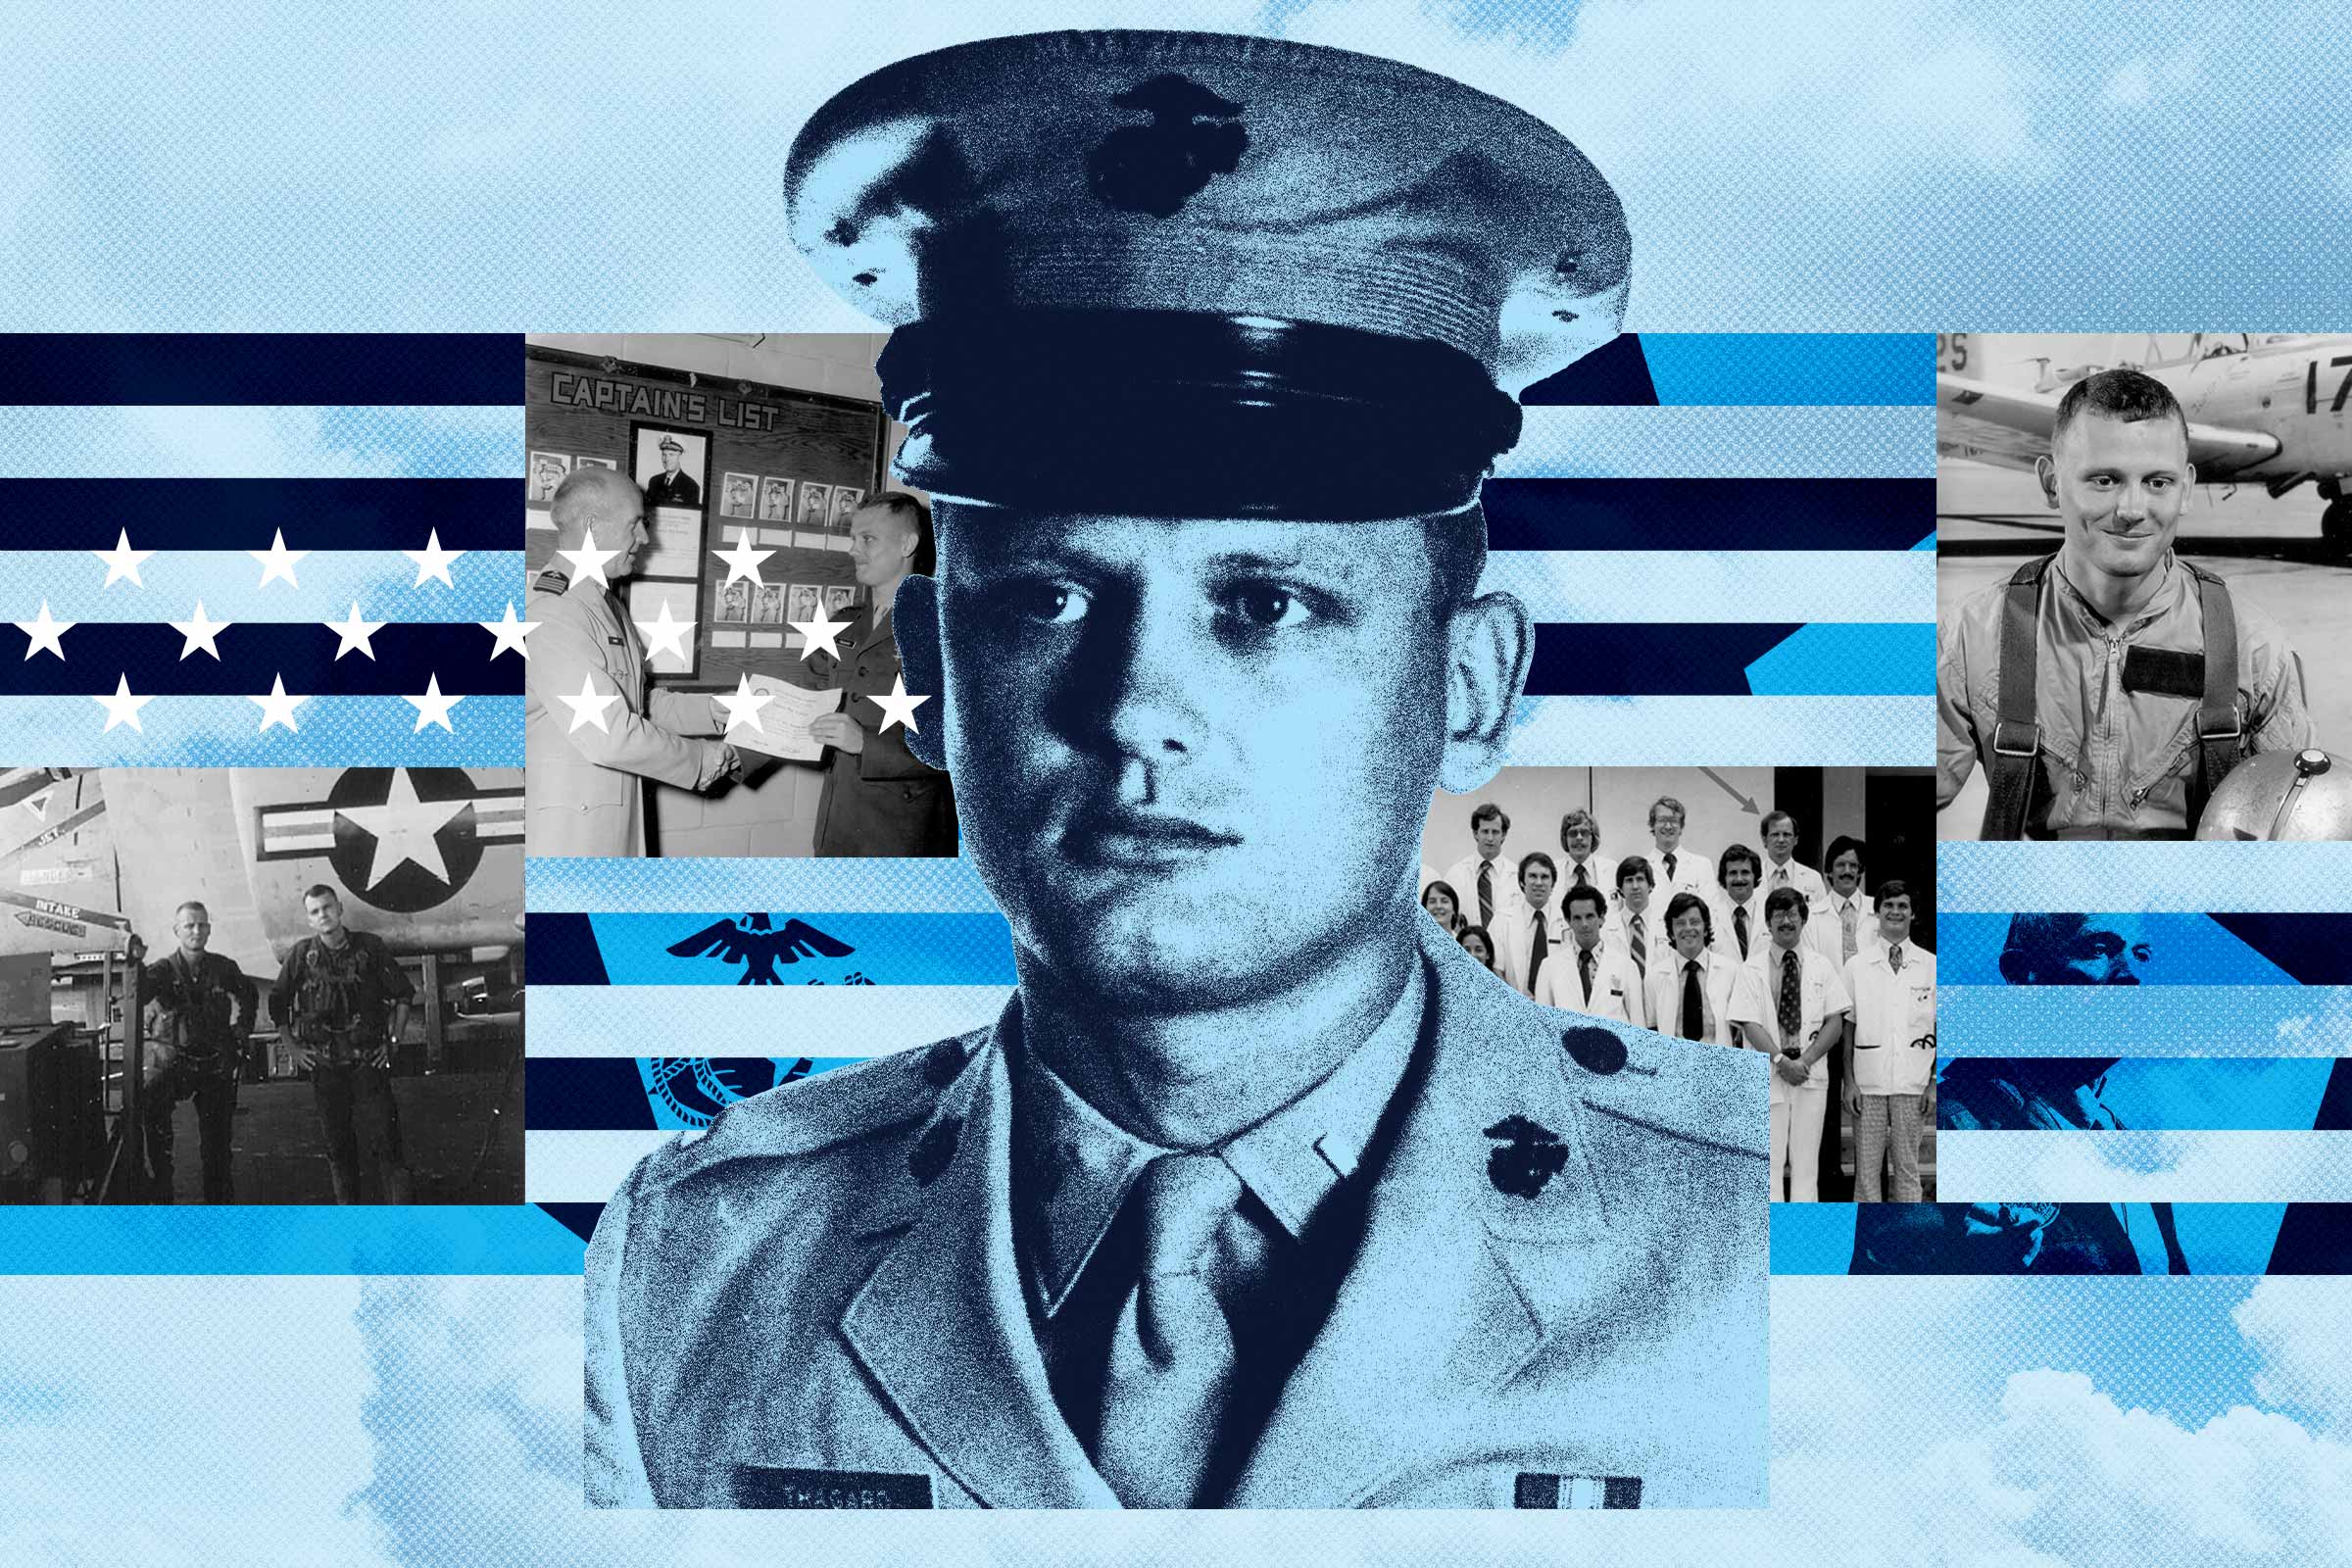 Photo collage of historical photos of Norman Thagard, M.D., serving in the Vietnam War as a fighter pilot and on space missions as a NASA astronaut. The collage is overlaid with images of stars and stripes with a large photo of Dr. Thagard dressed in his U.S. Marines uniform as a young man.